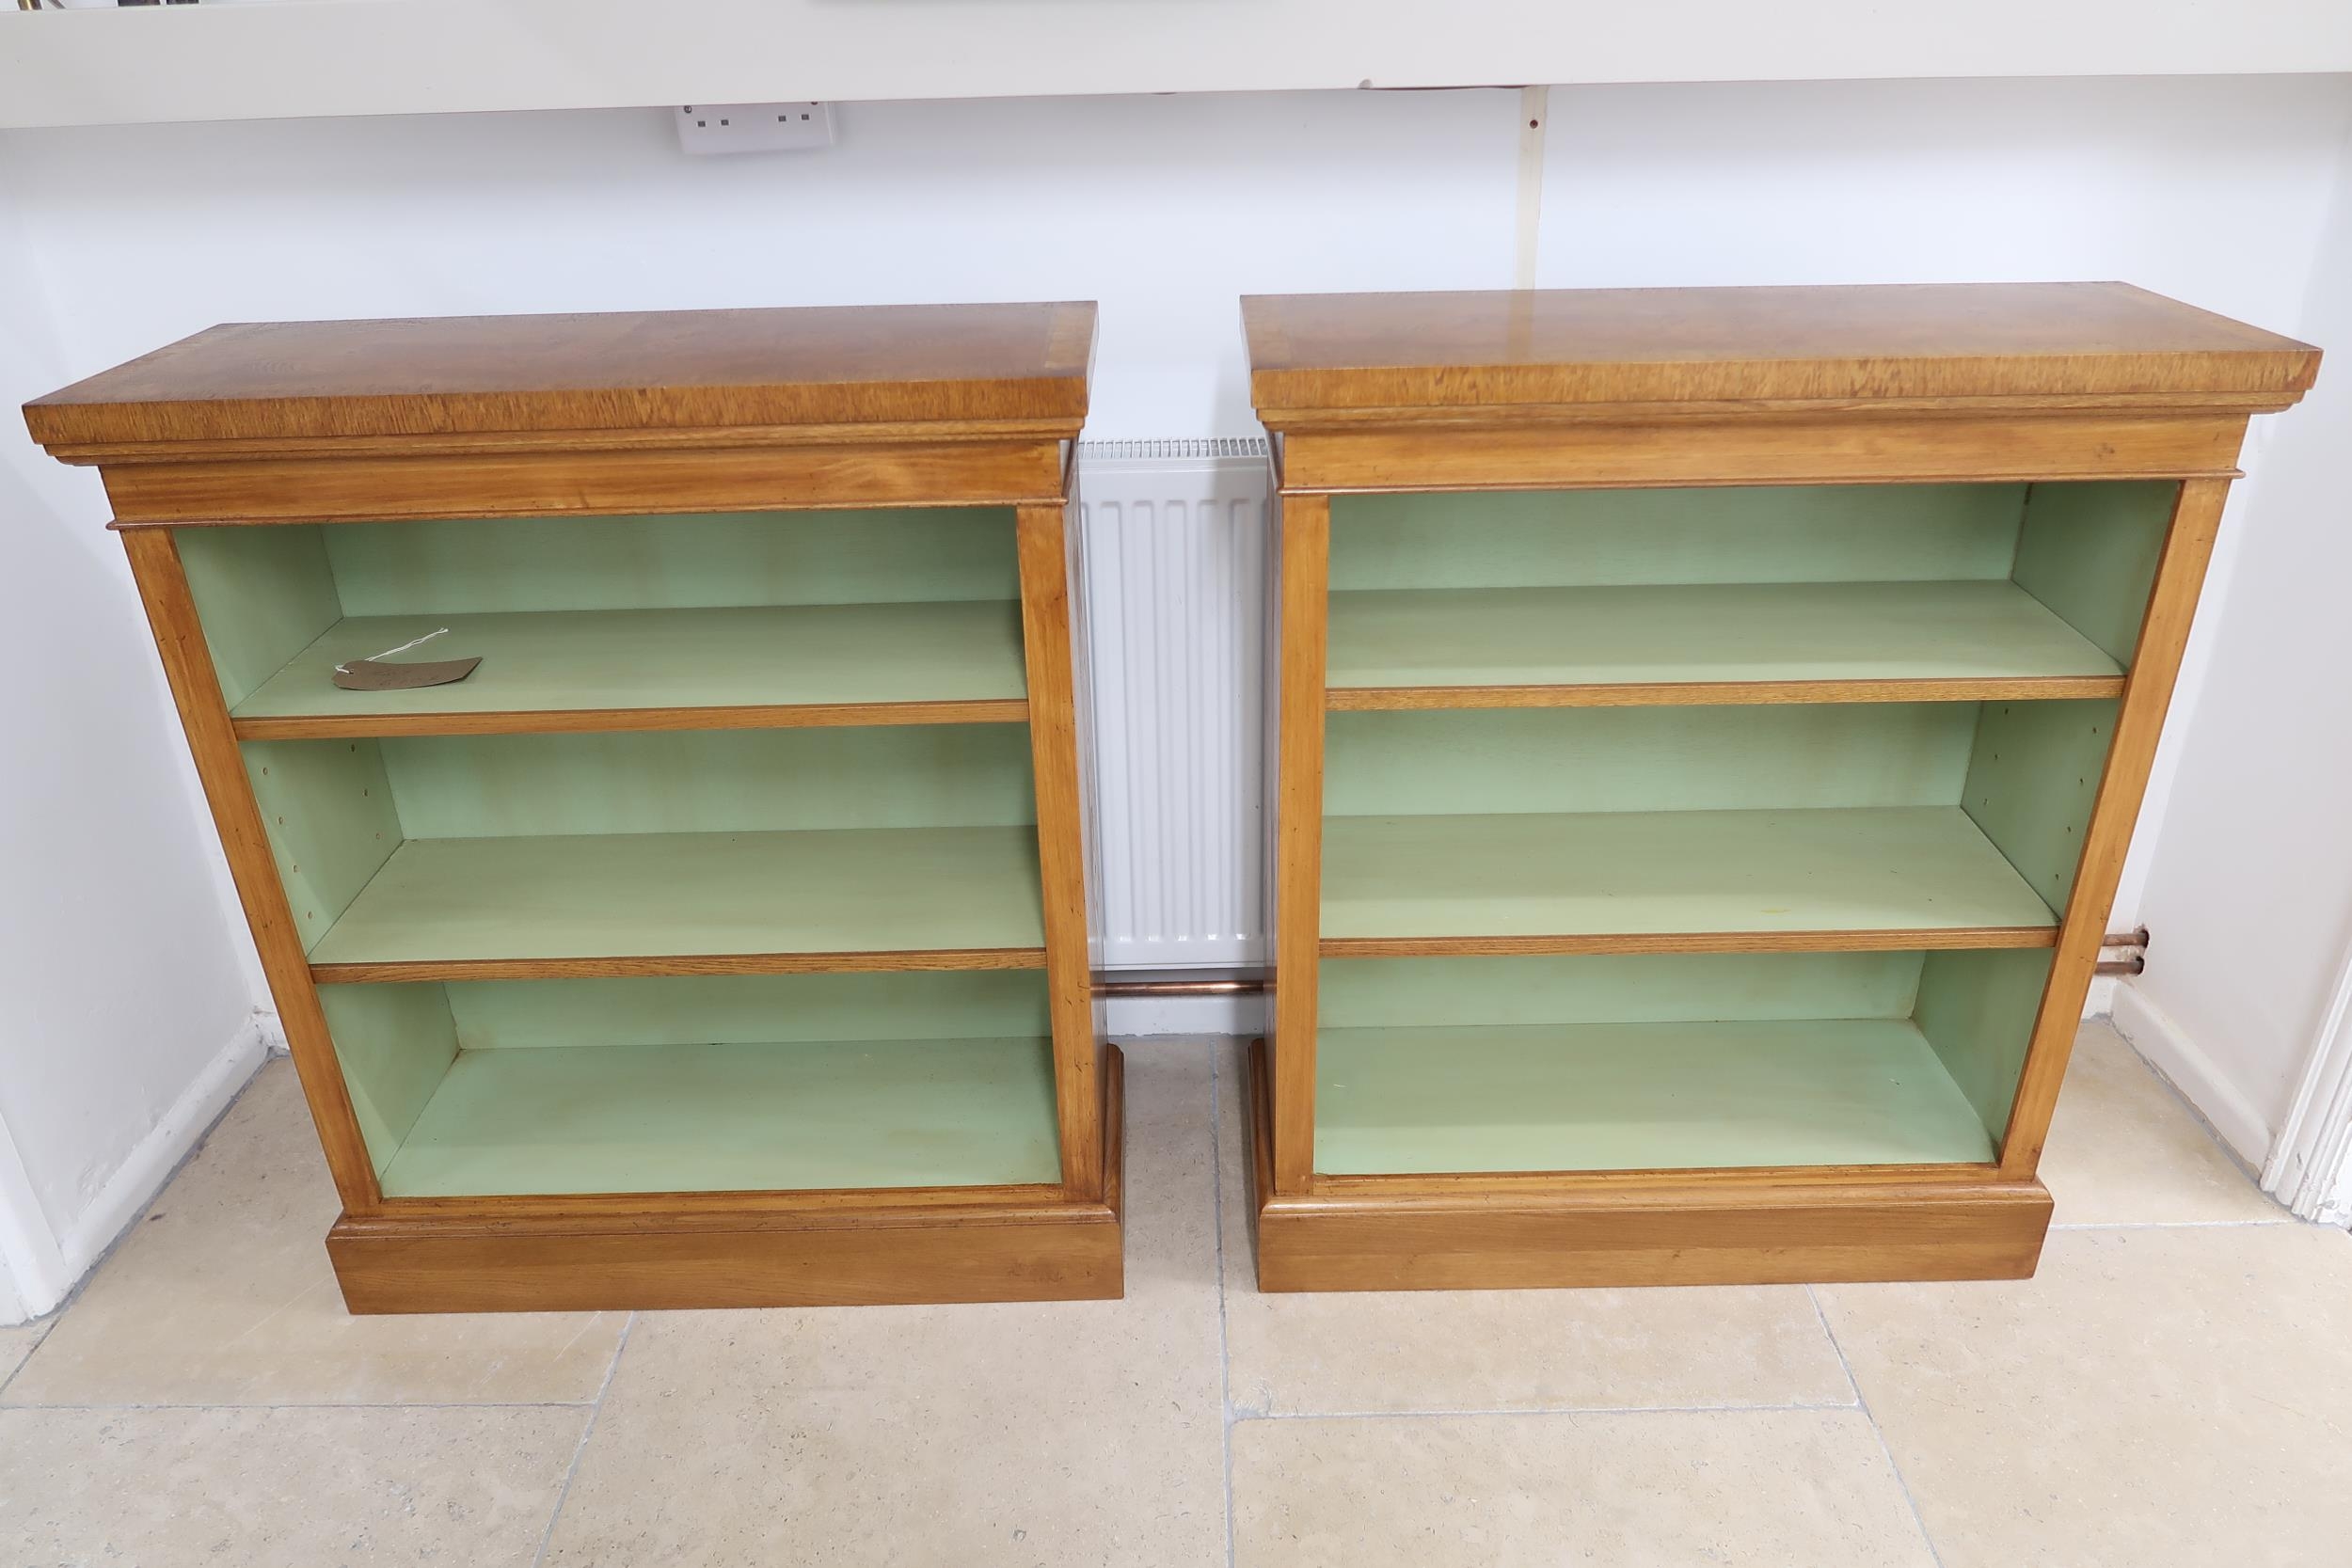 A pair of burr oak bookcases with two adjustable shelves - Width 82cm x Height 95cm x Depth 30cm - Image 2 of 3